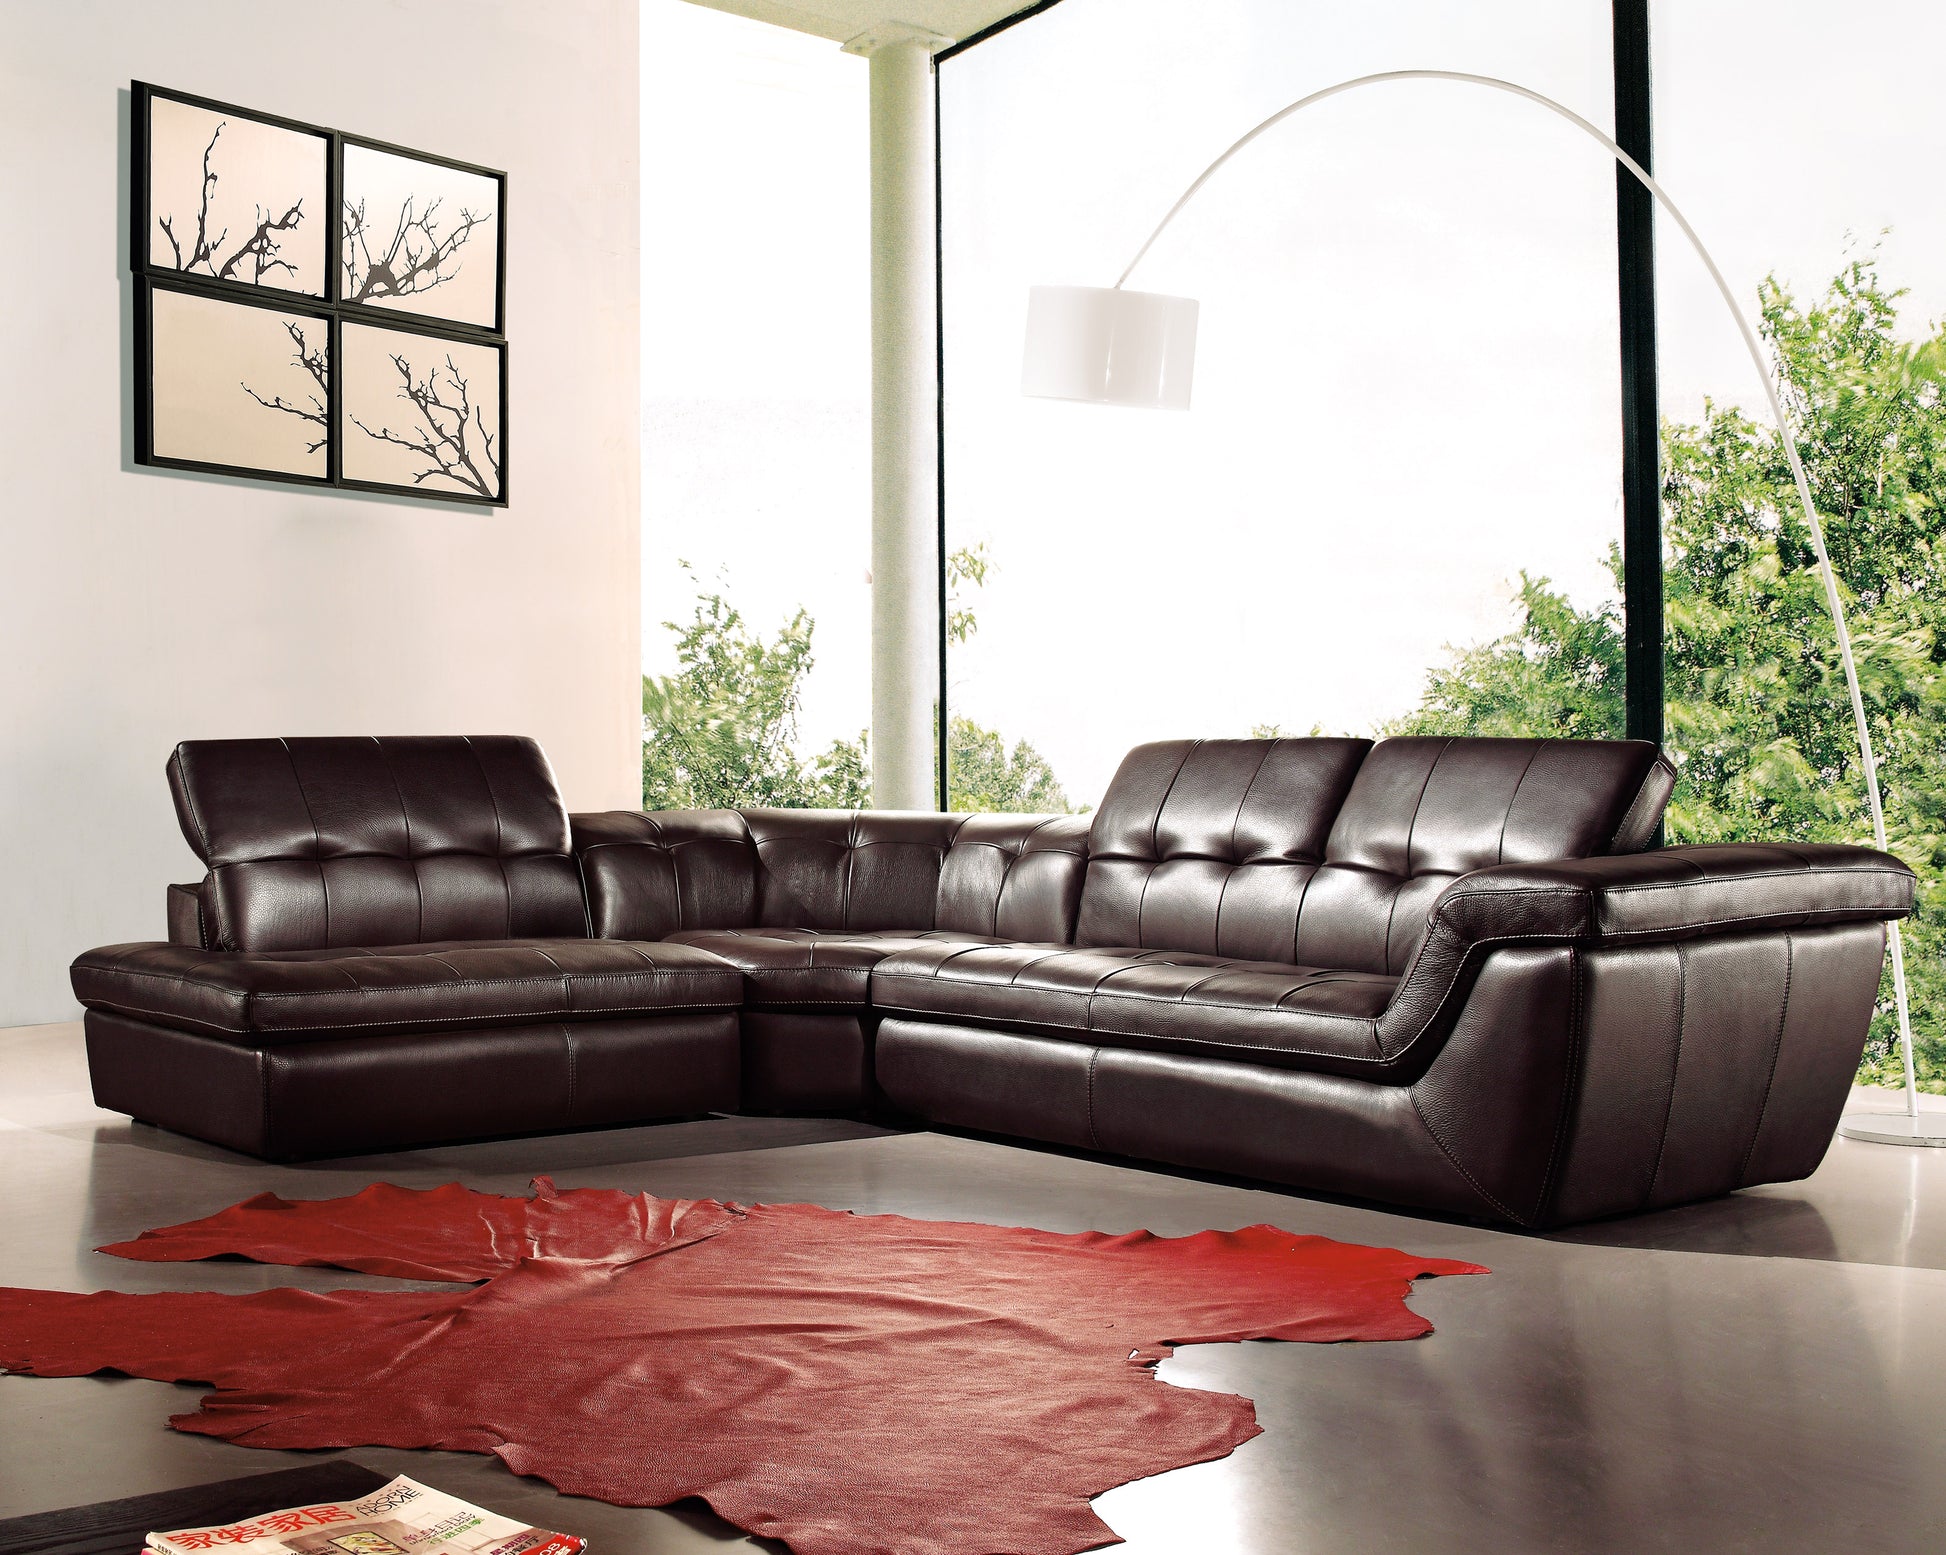 397 Italian Leather Sectional Sofa Chocolate Color LHF by JM